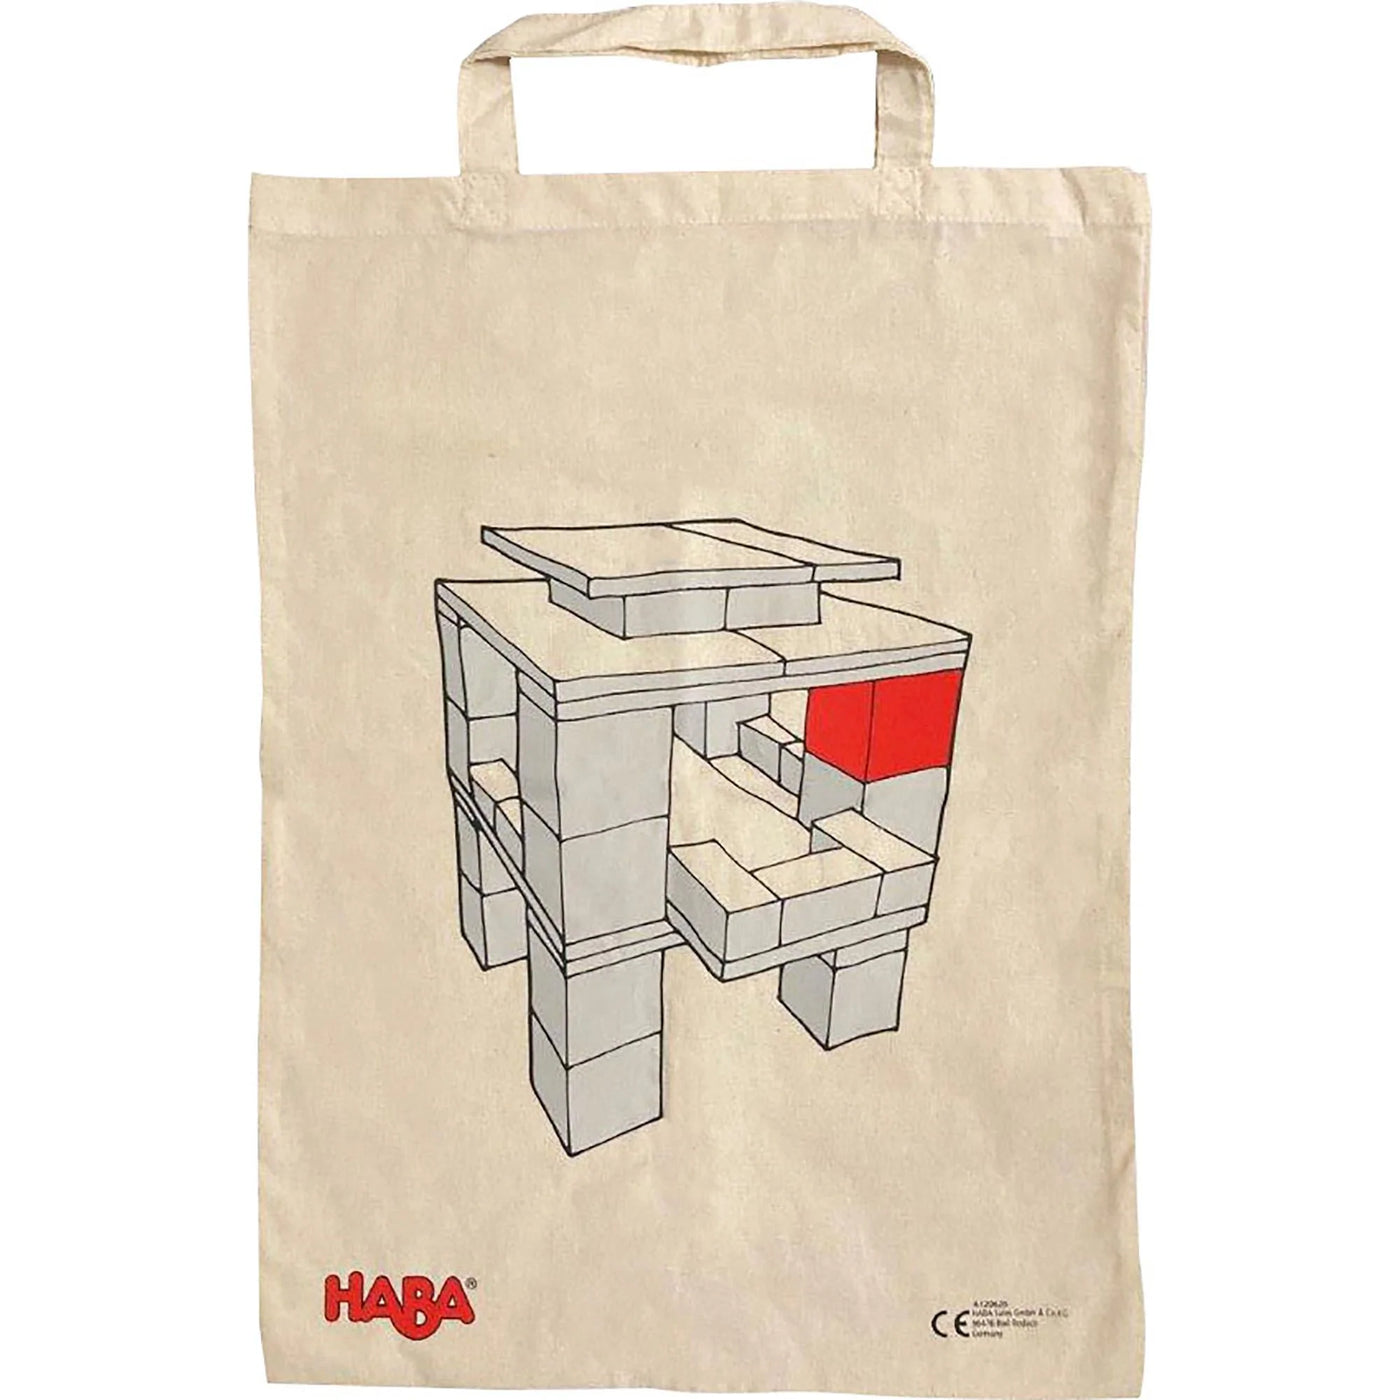 Haba - Clever up 3.0